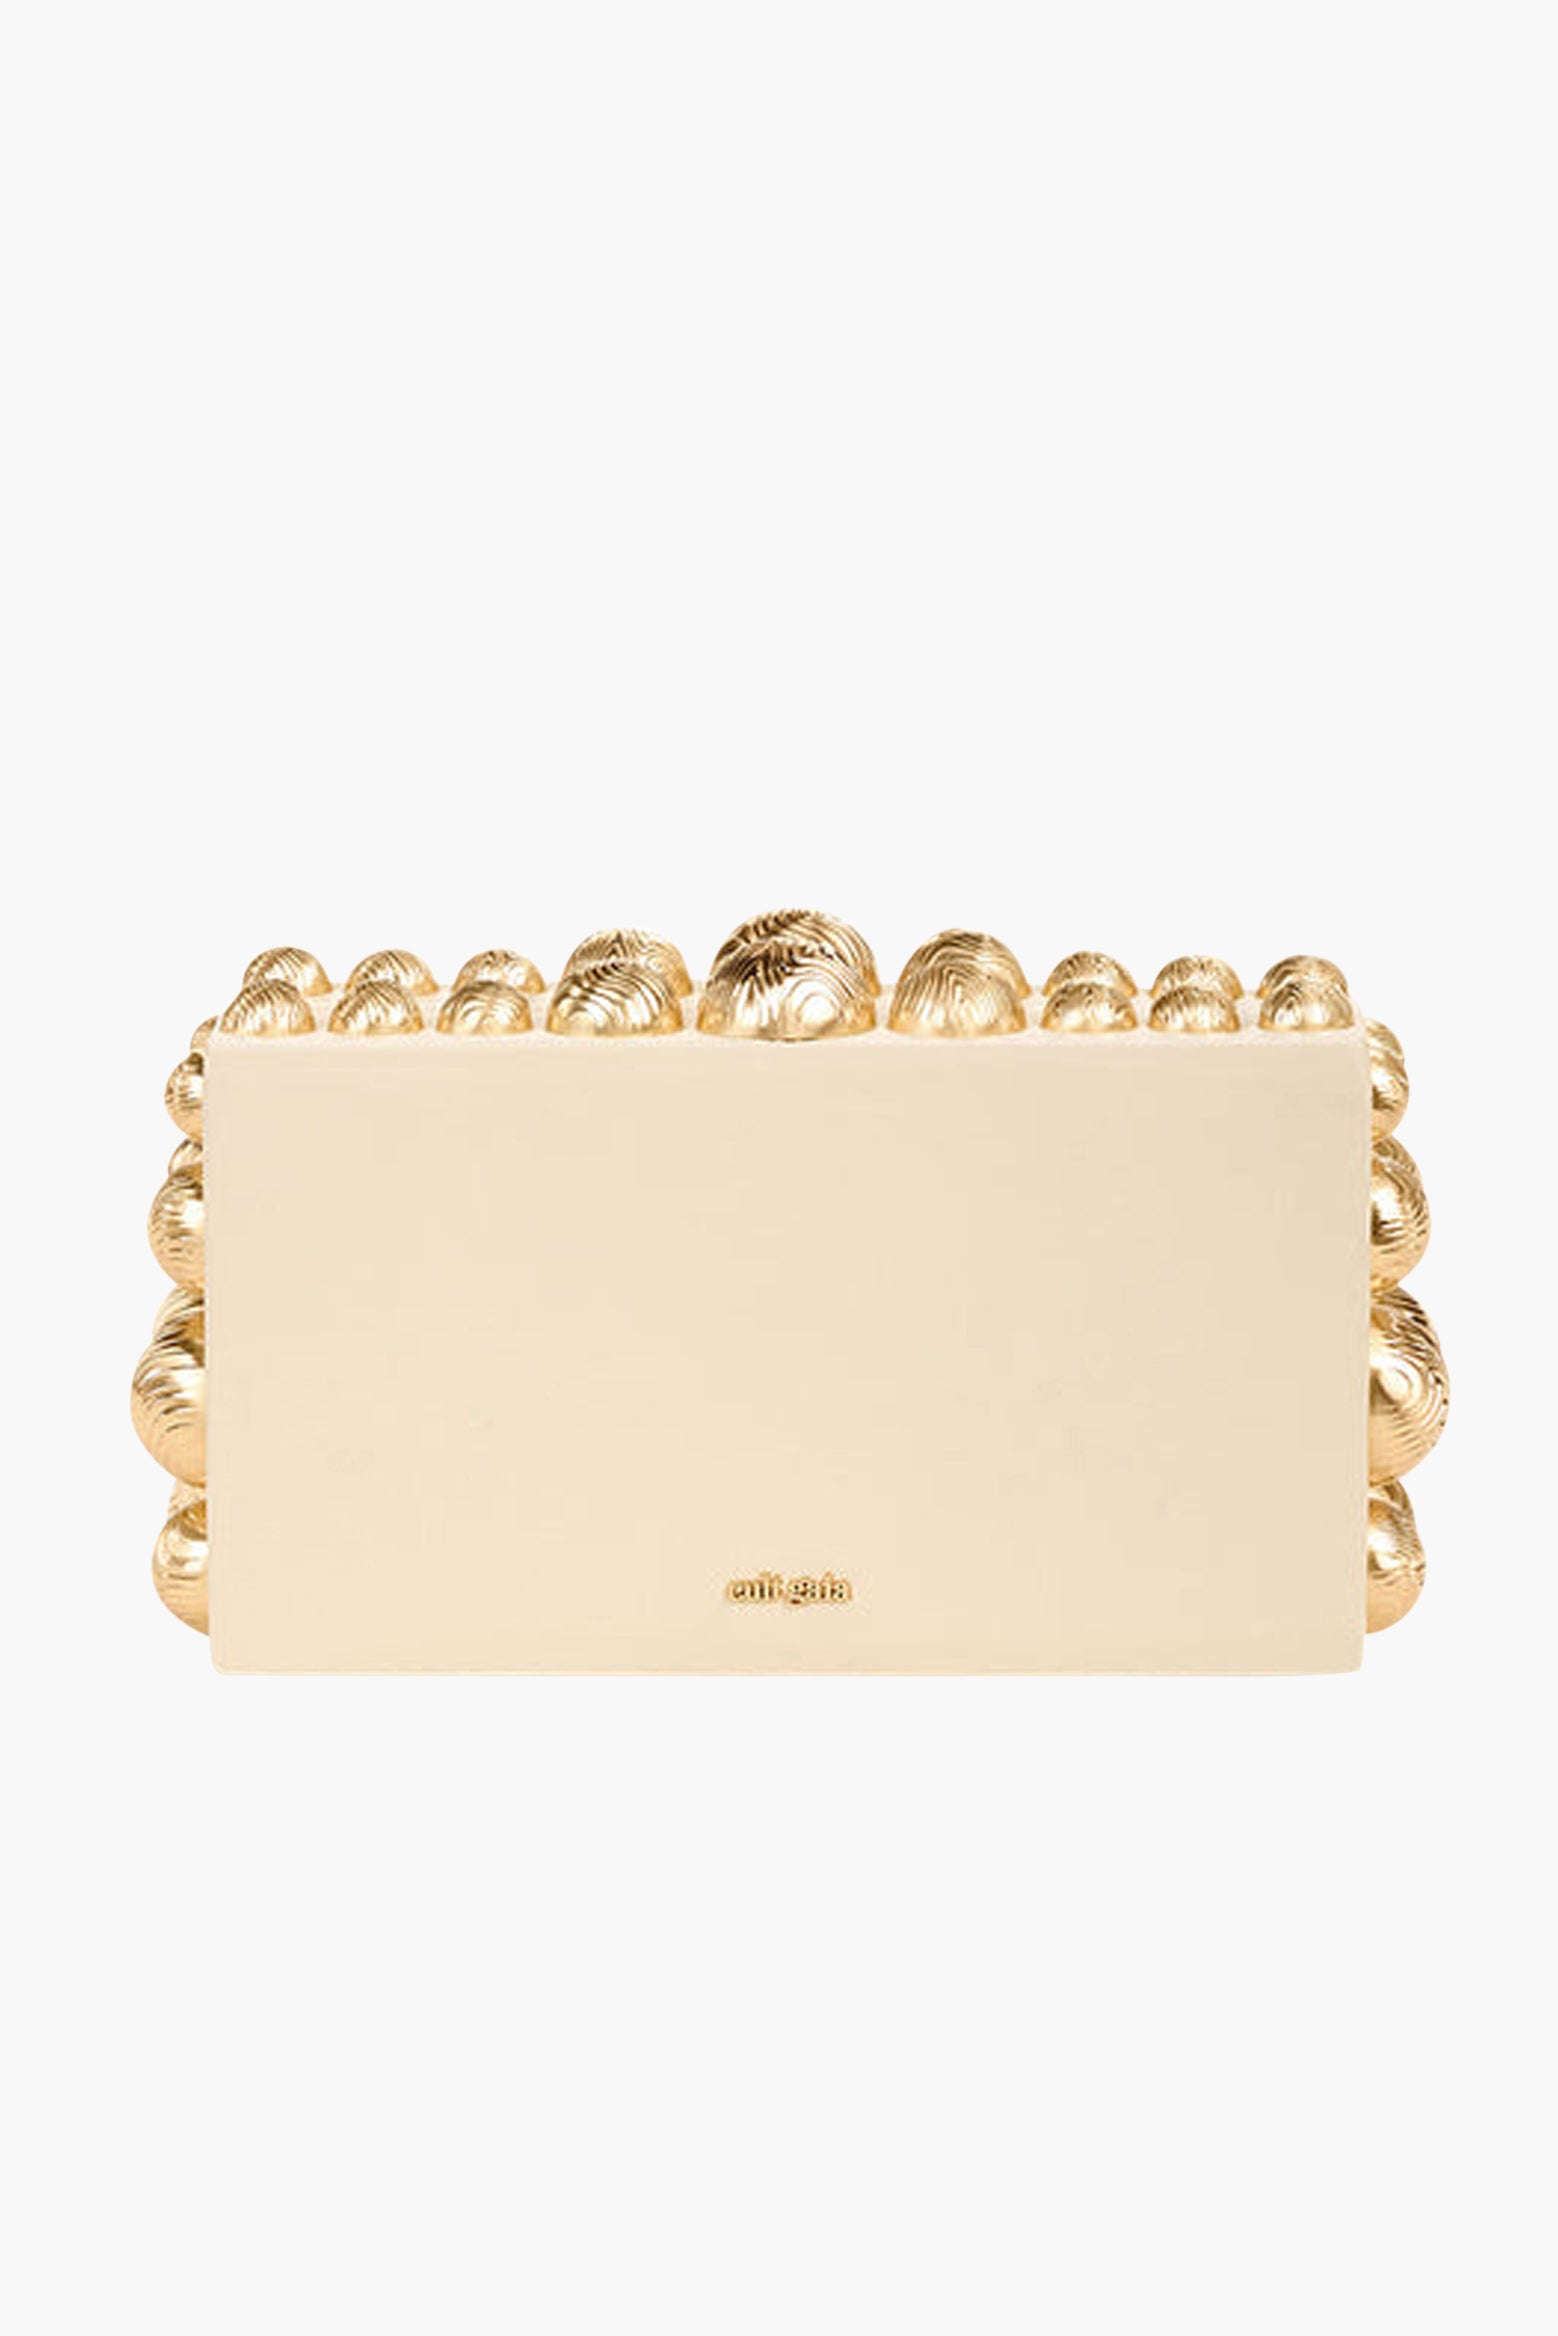 Cult Gaia Yadira Clutch in Off-White available at TNT The New Trend Australia.